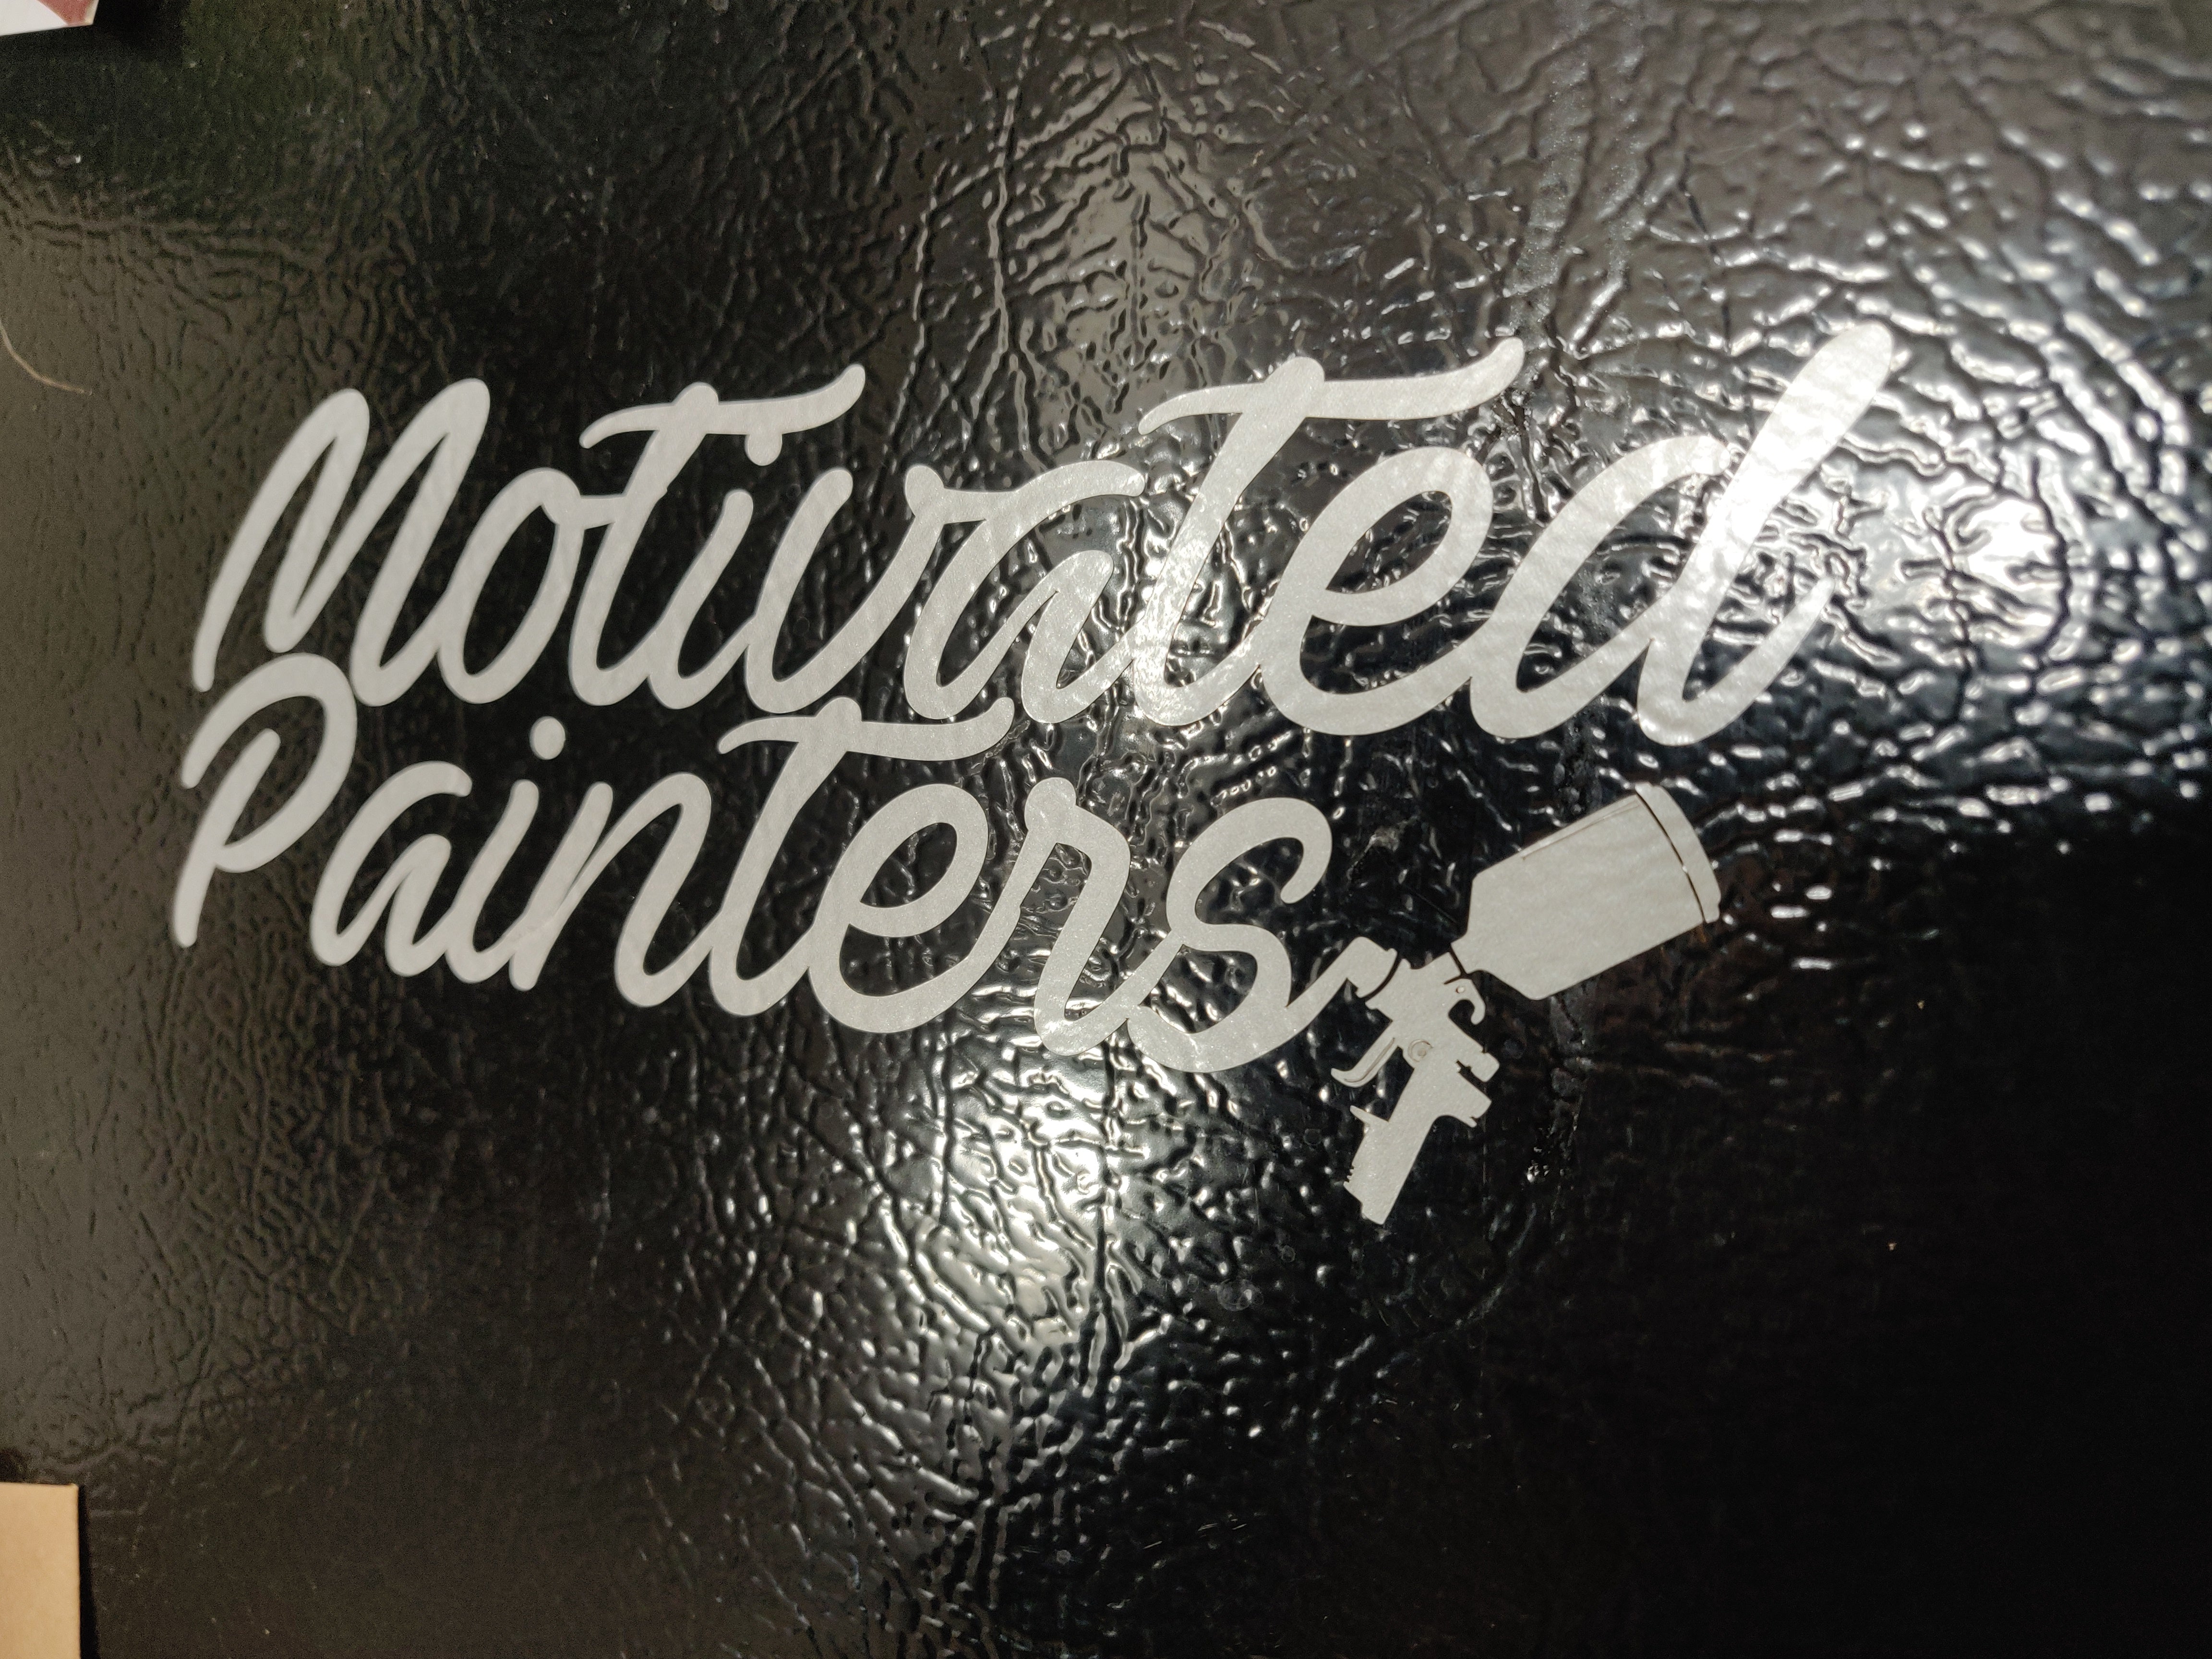 Motivated Painters decal